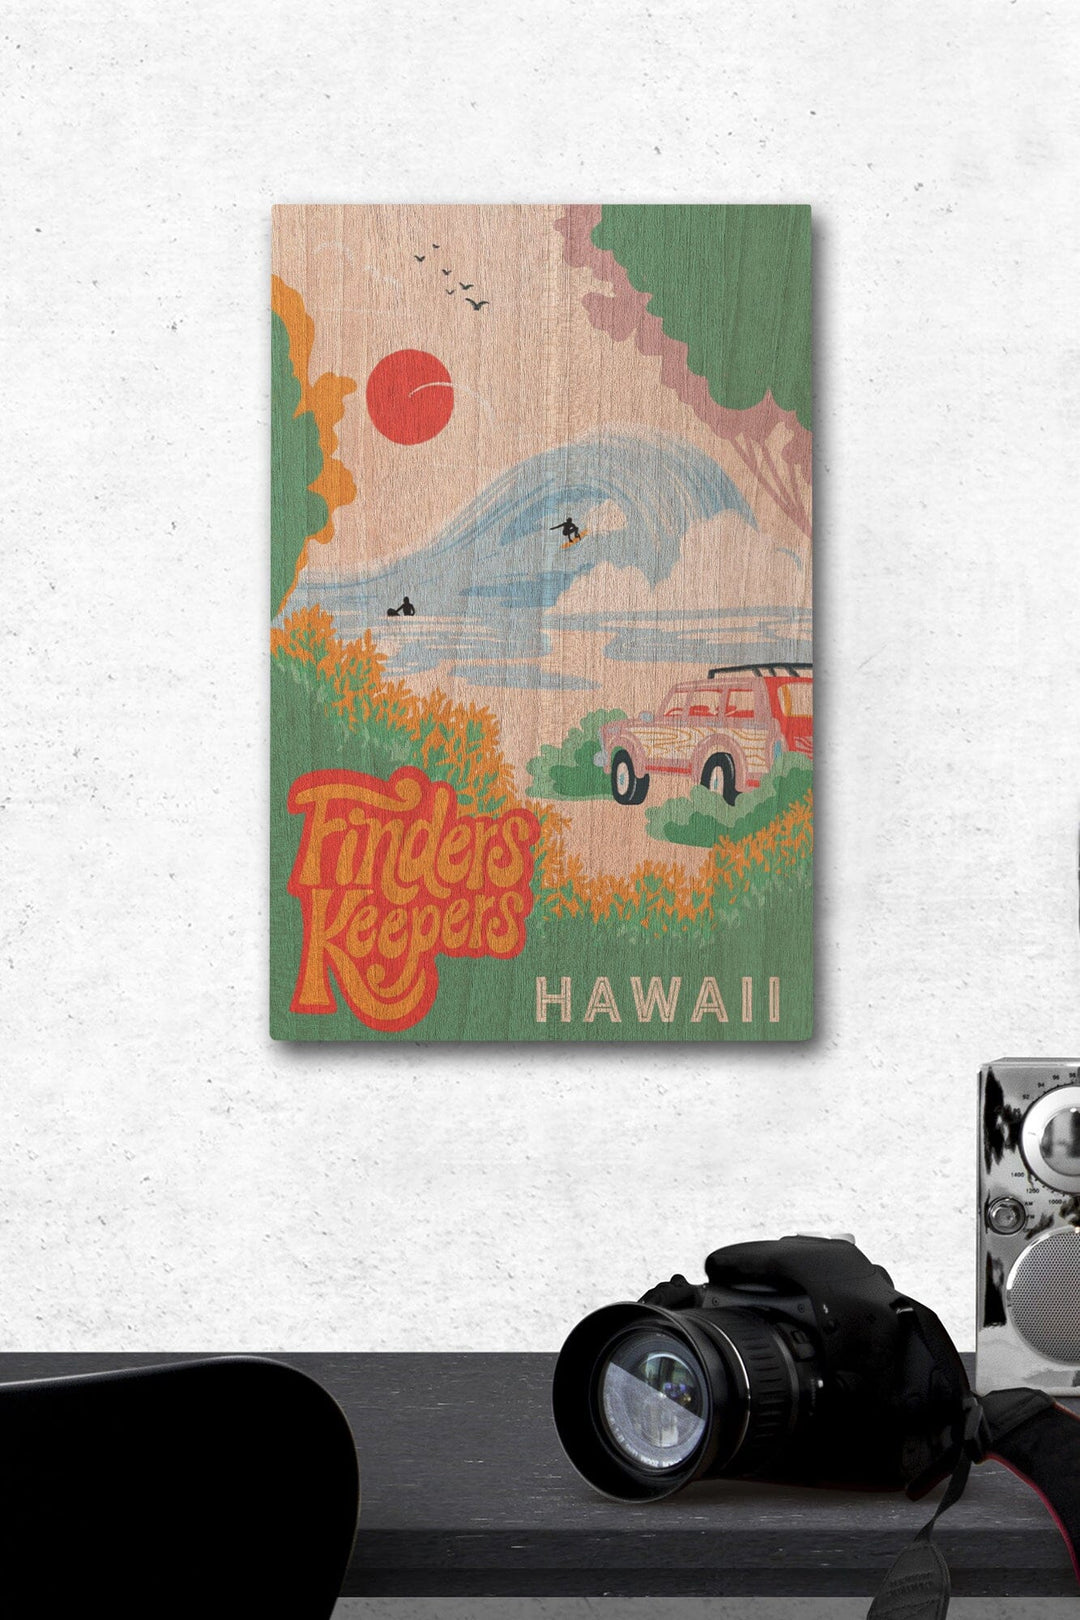 Hawaii, Secret Surf Spot Collection, Surf Scene At The Beach, Finders Keepers, Lantern Press Artwork, Wood Signs and Postcards Wood Lantern Press 12 x 18 Wood Gallery Print 